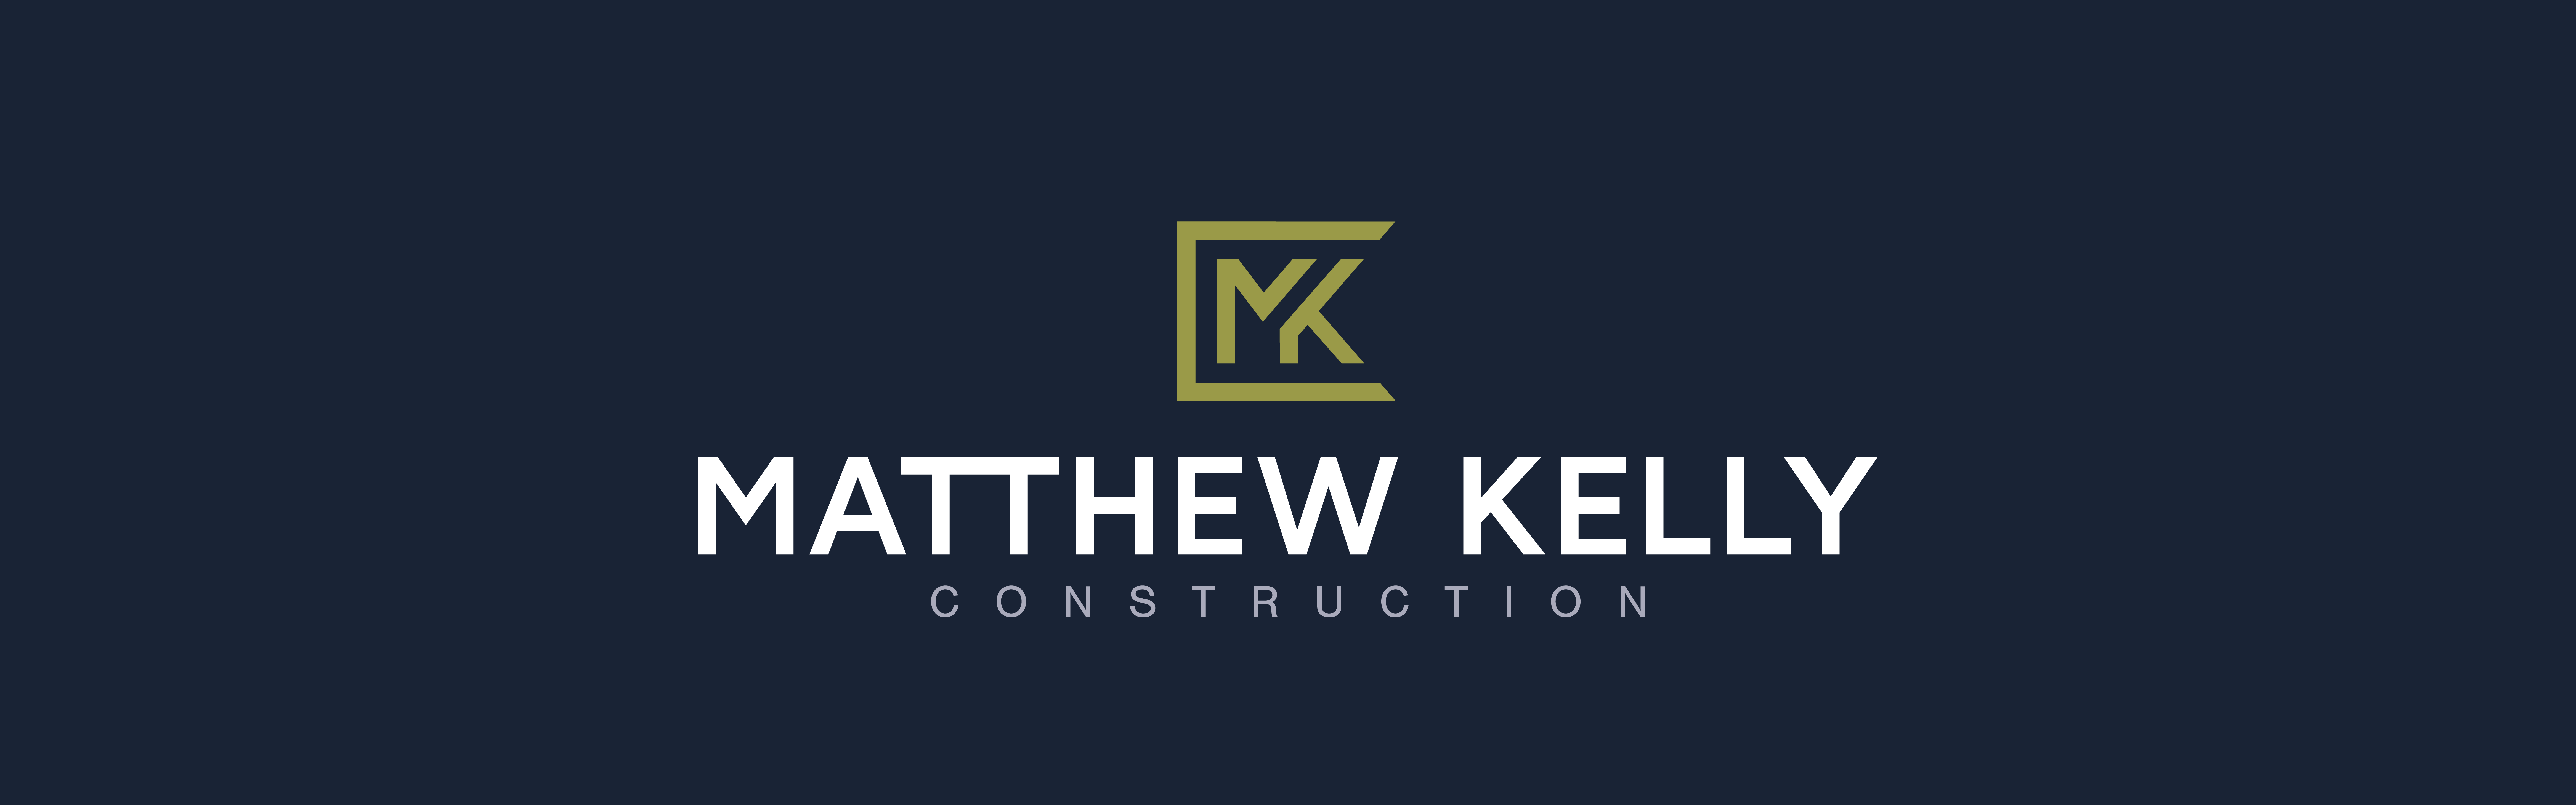 Logo of Matthew Kelly Construction featuring a stylized 'MK' in a geometric font on a navy background.